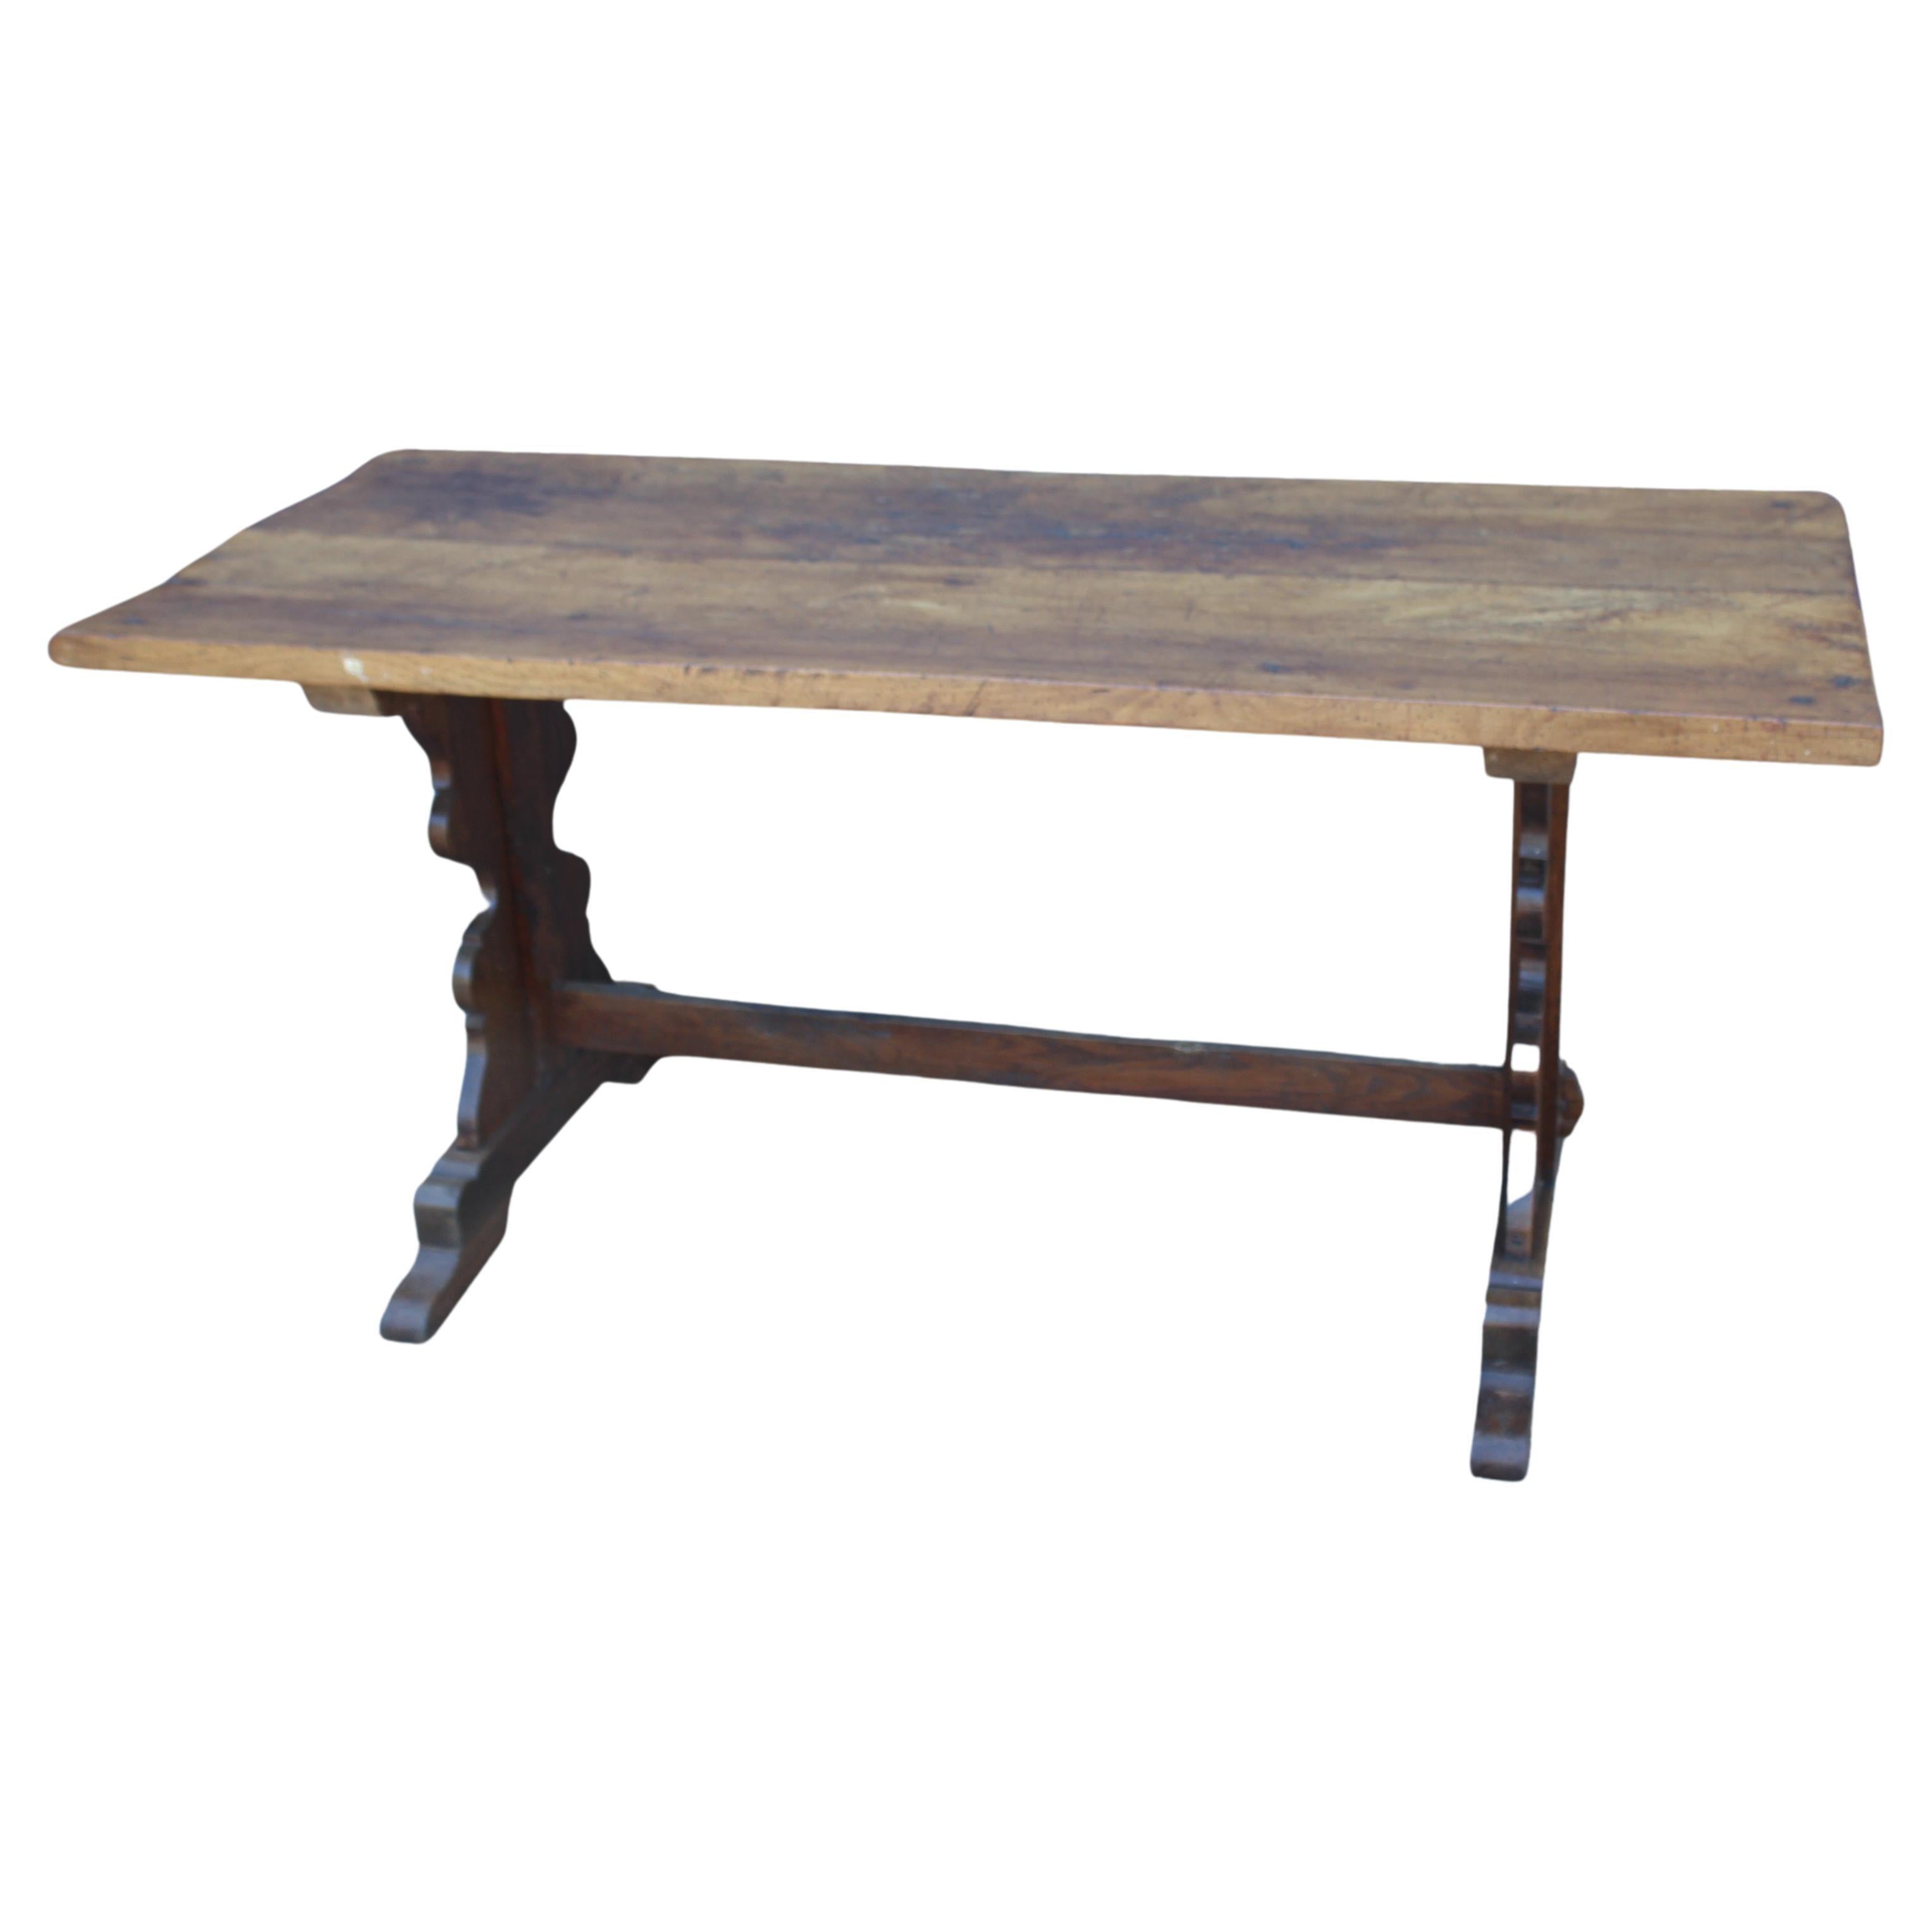 19thc. Fruitwood & Oak Two Plank Refectory Table